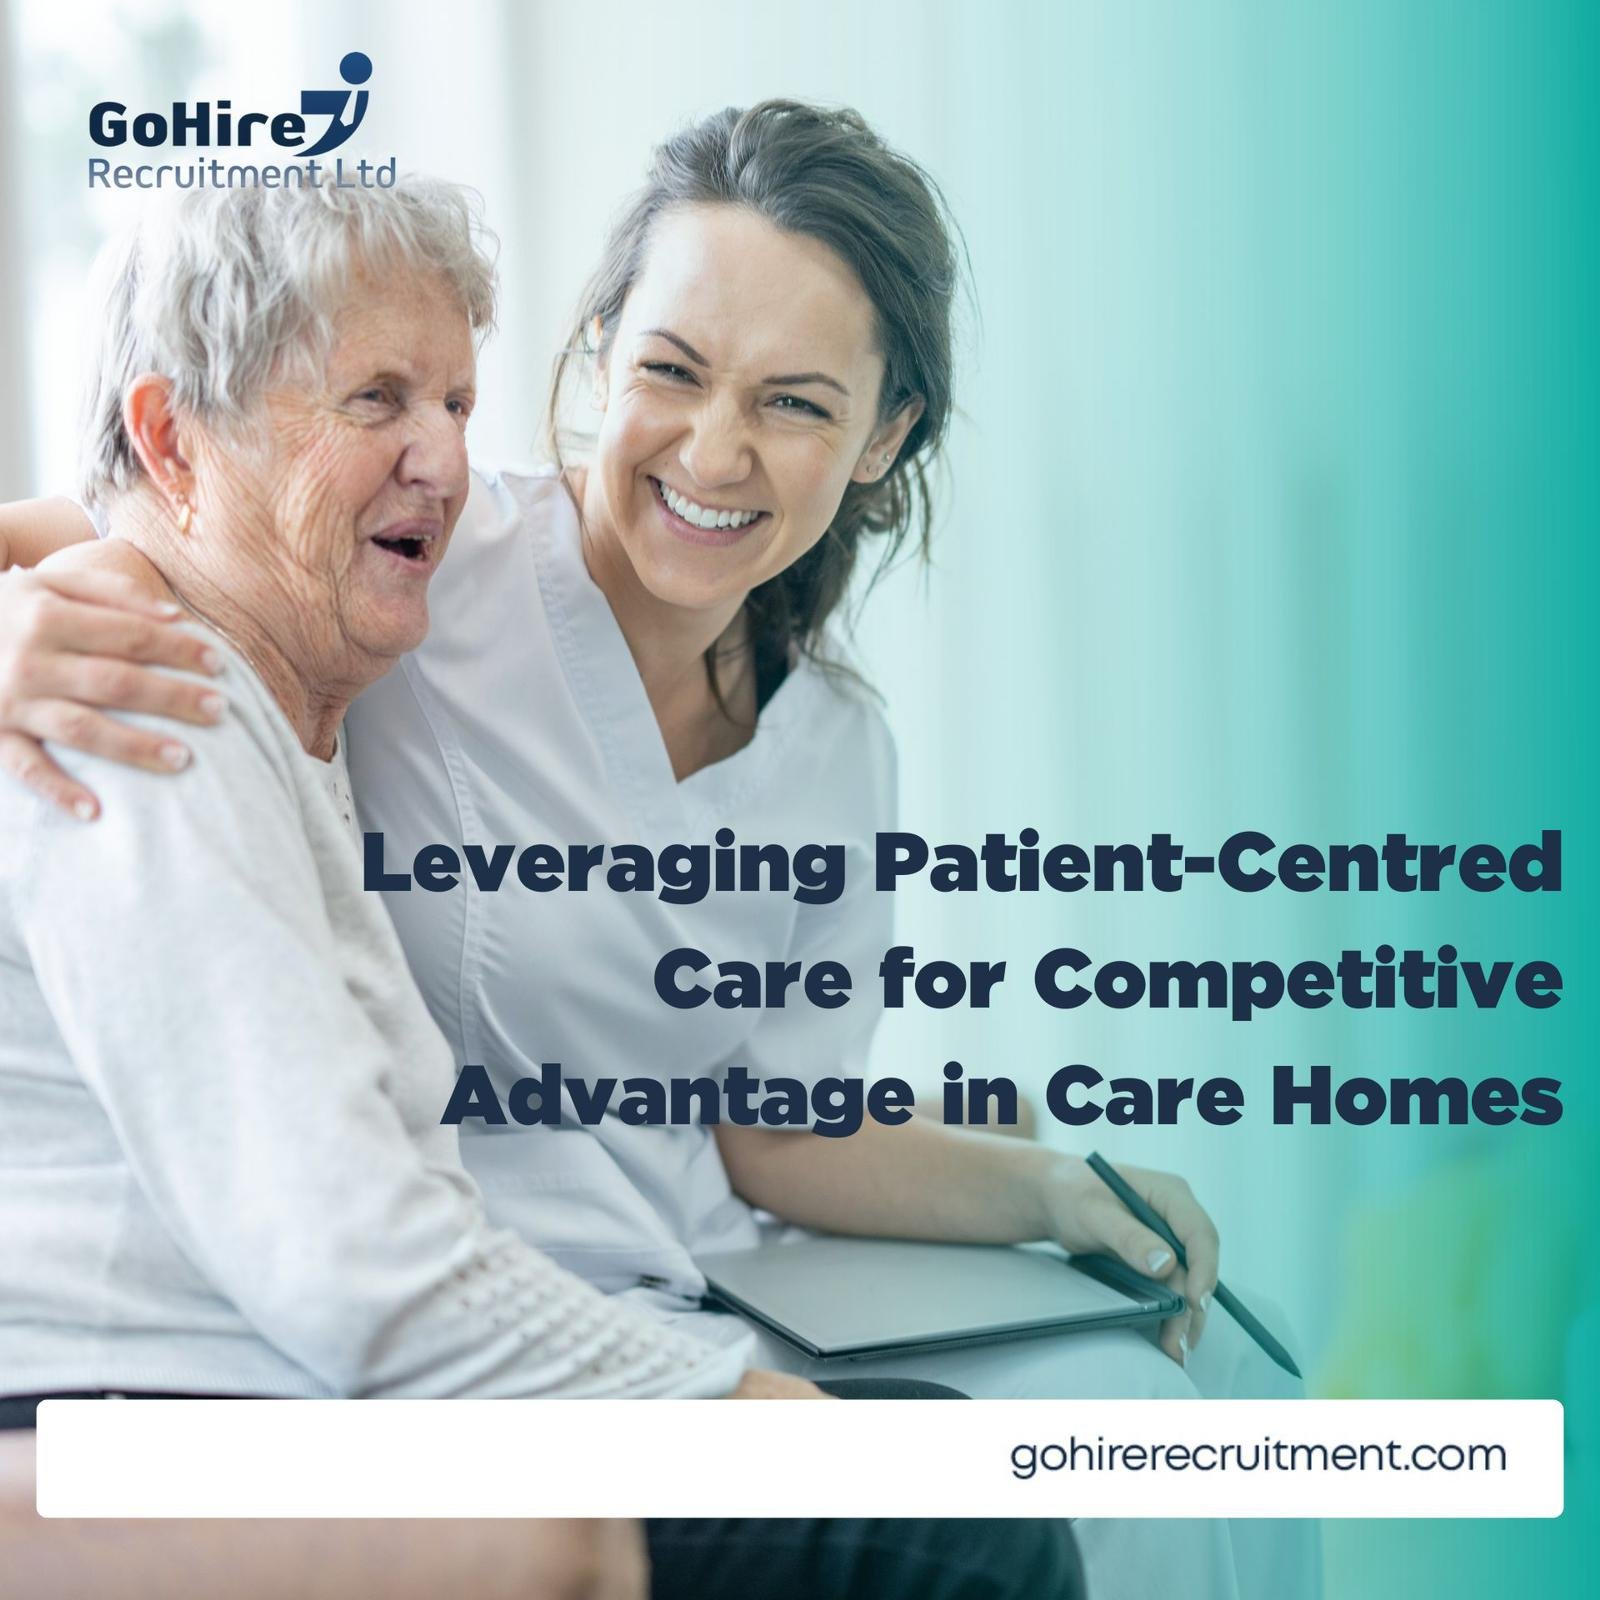 Leveraging Patient-Centred Care for Competitive Advantage in Care Homes